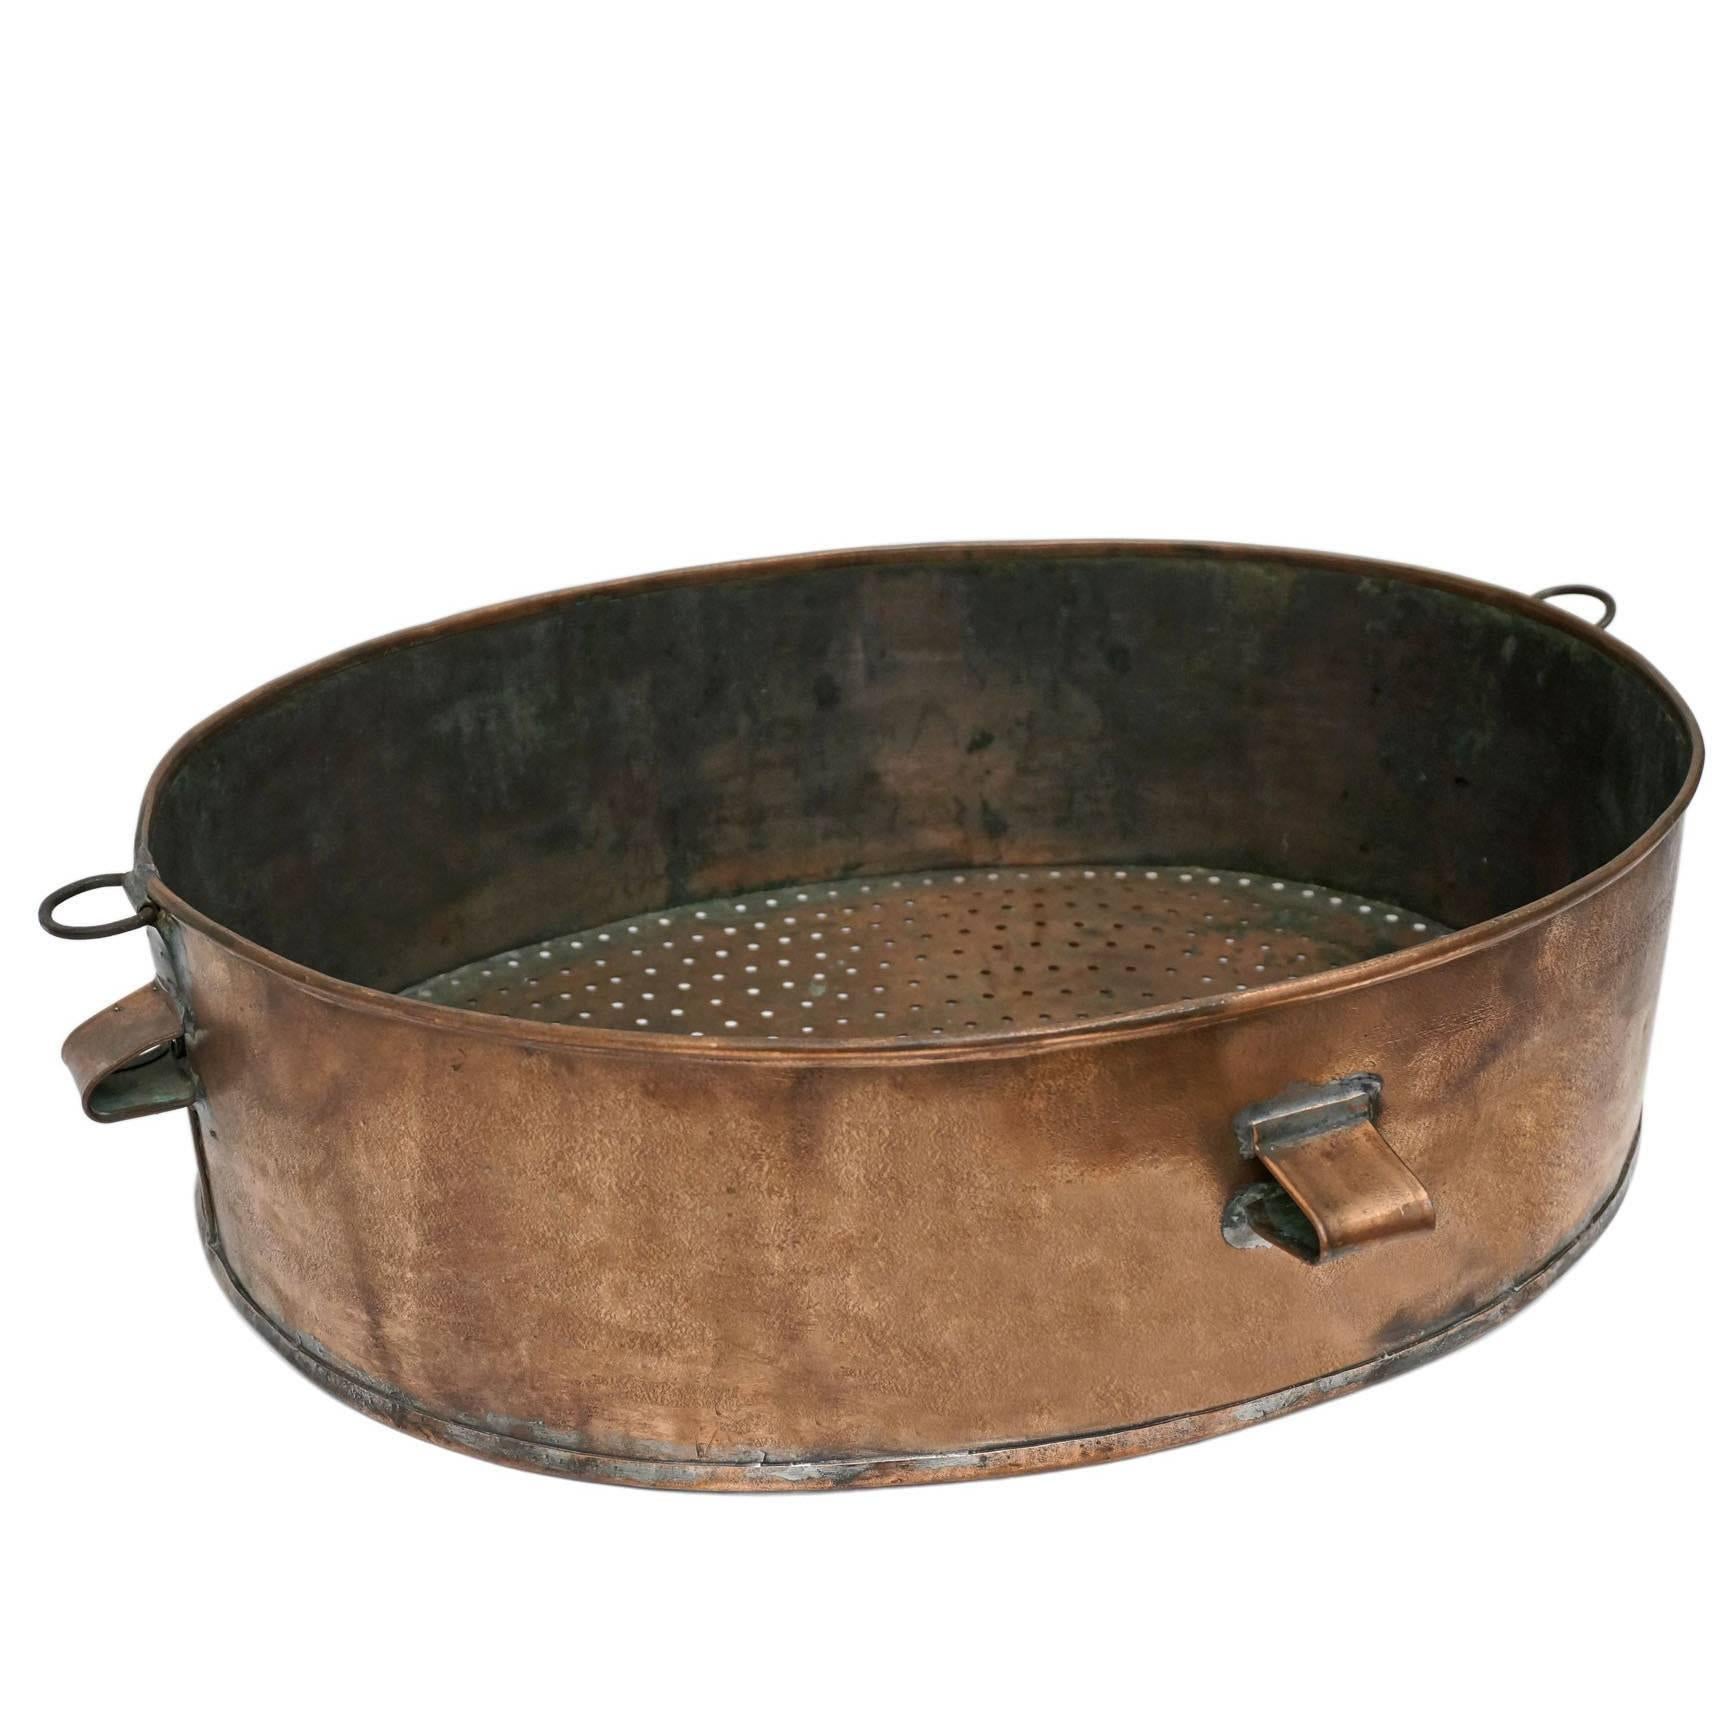 Early 20th Century French Copper Tub, Large Oval Strainer or Centerpiece